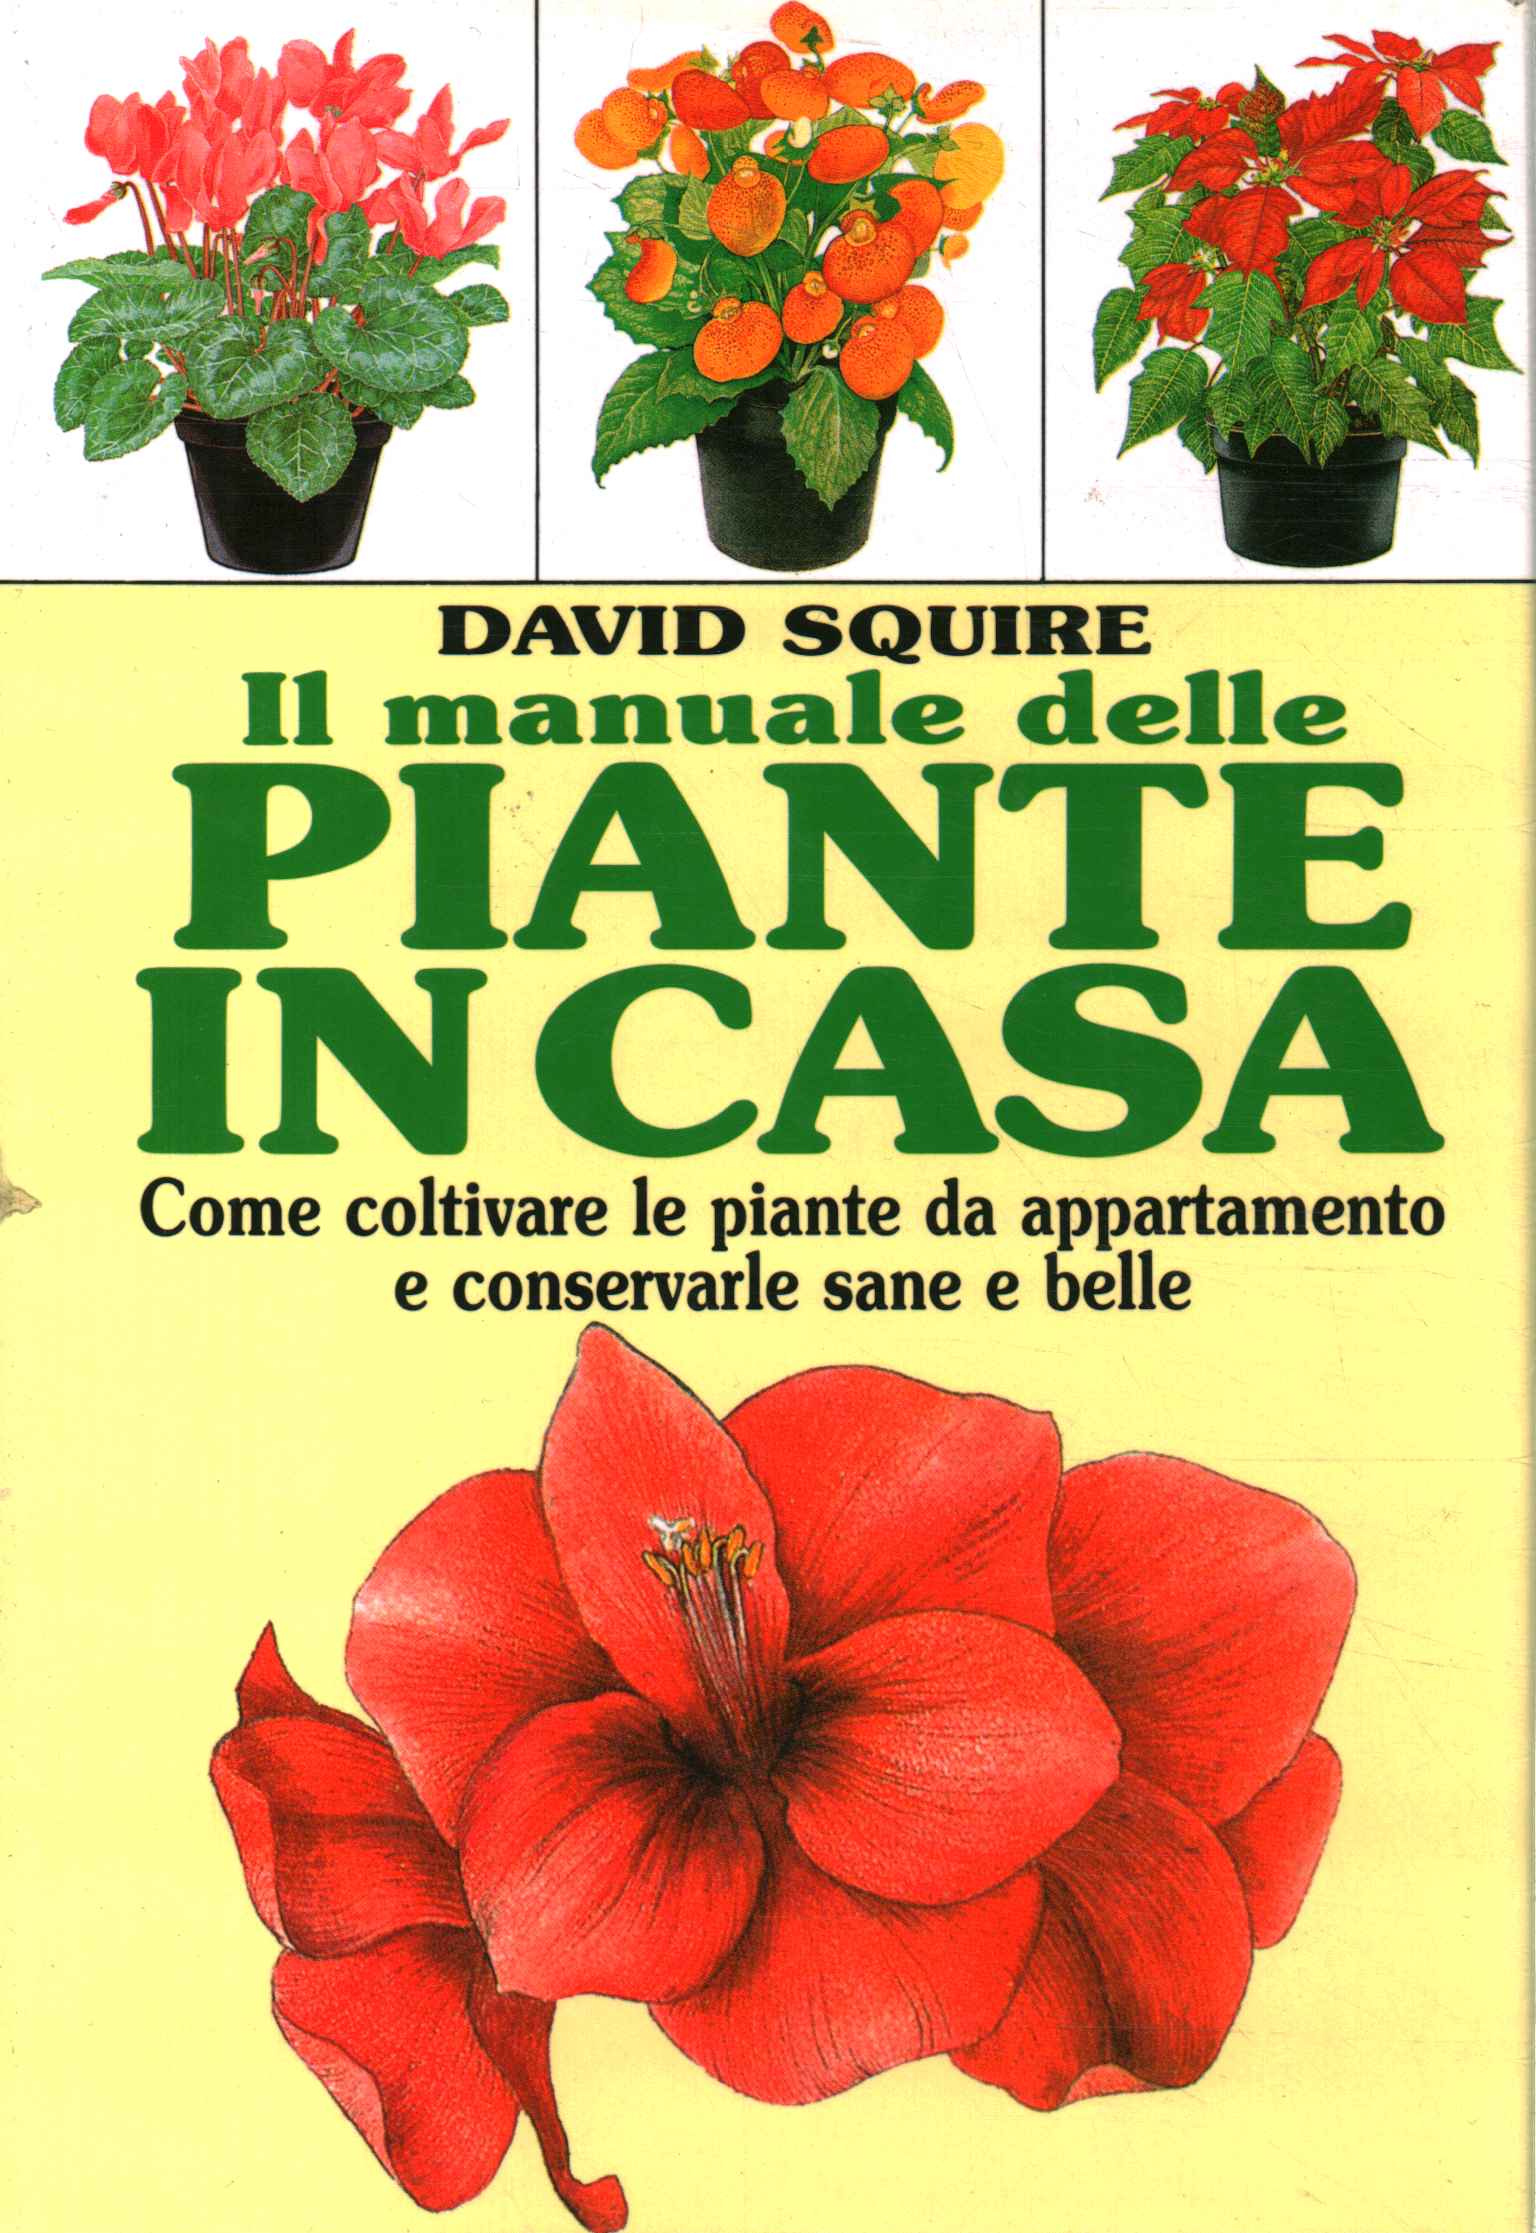 The manual of plants in the home